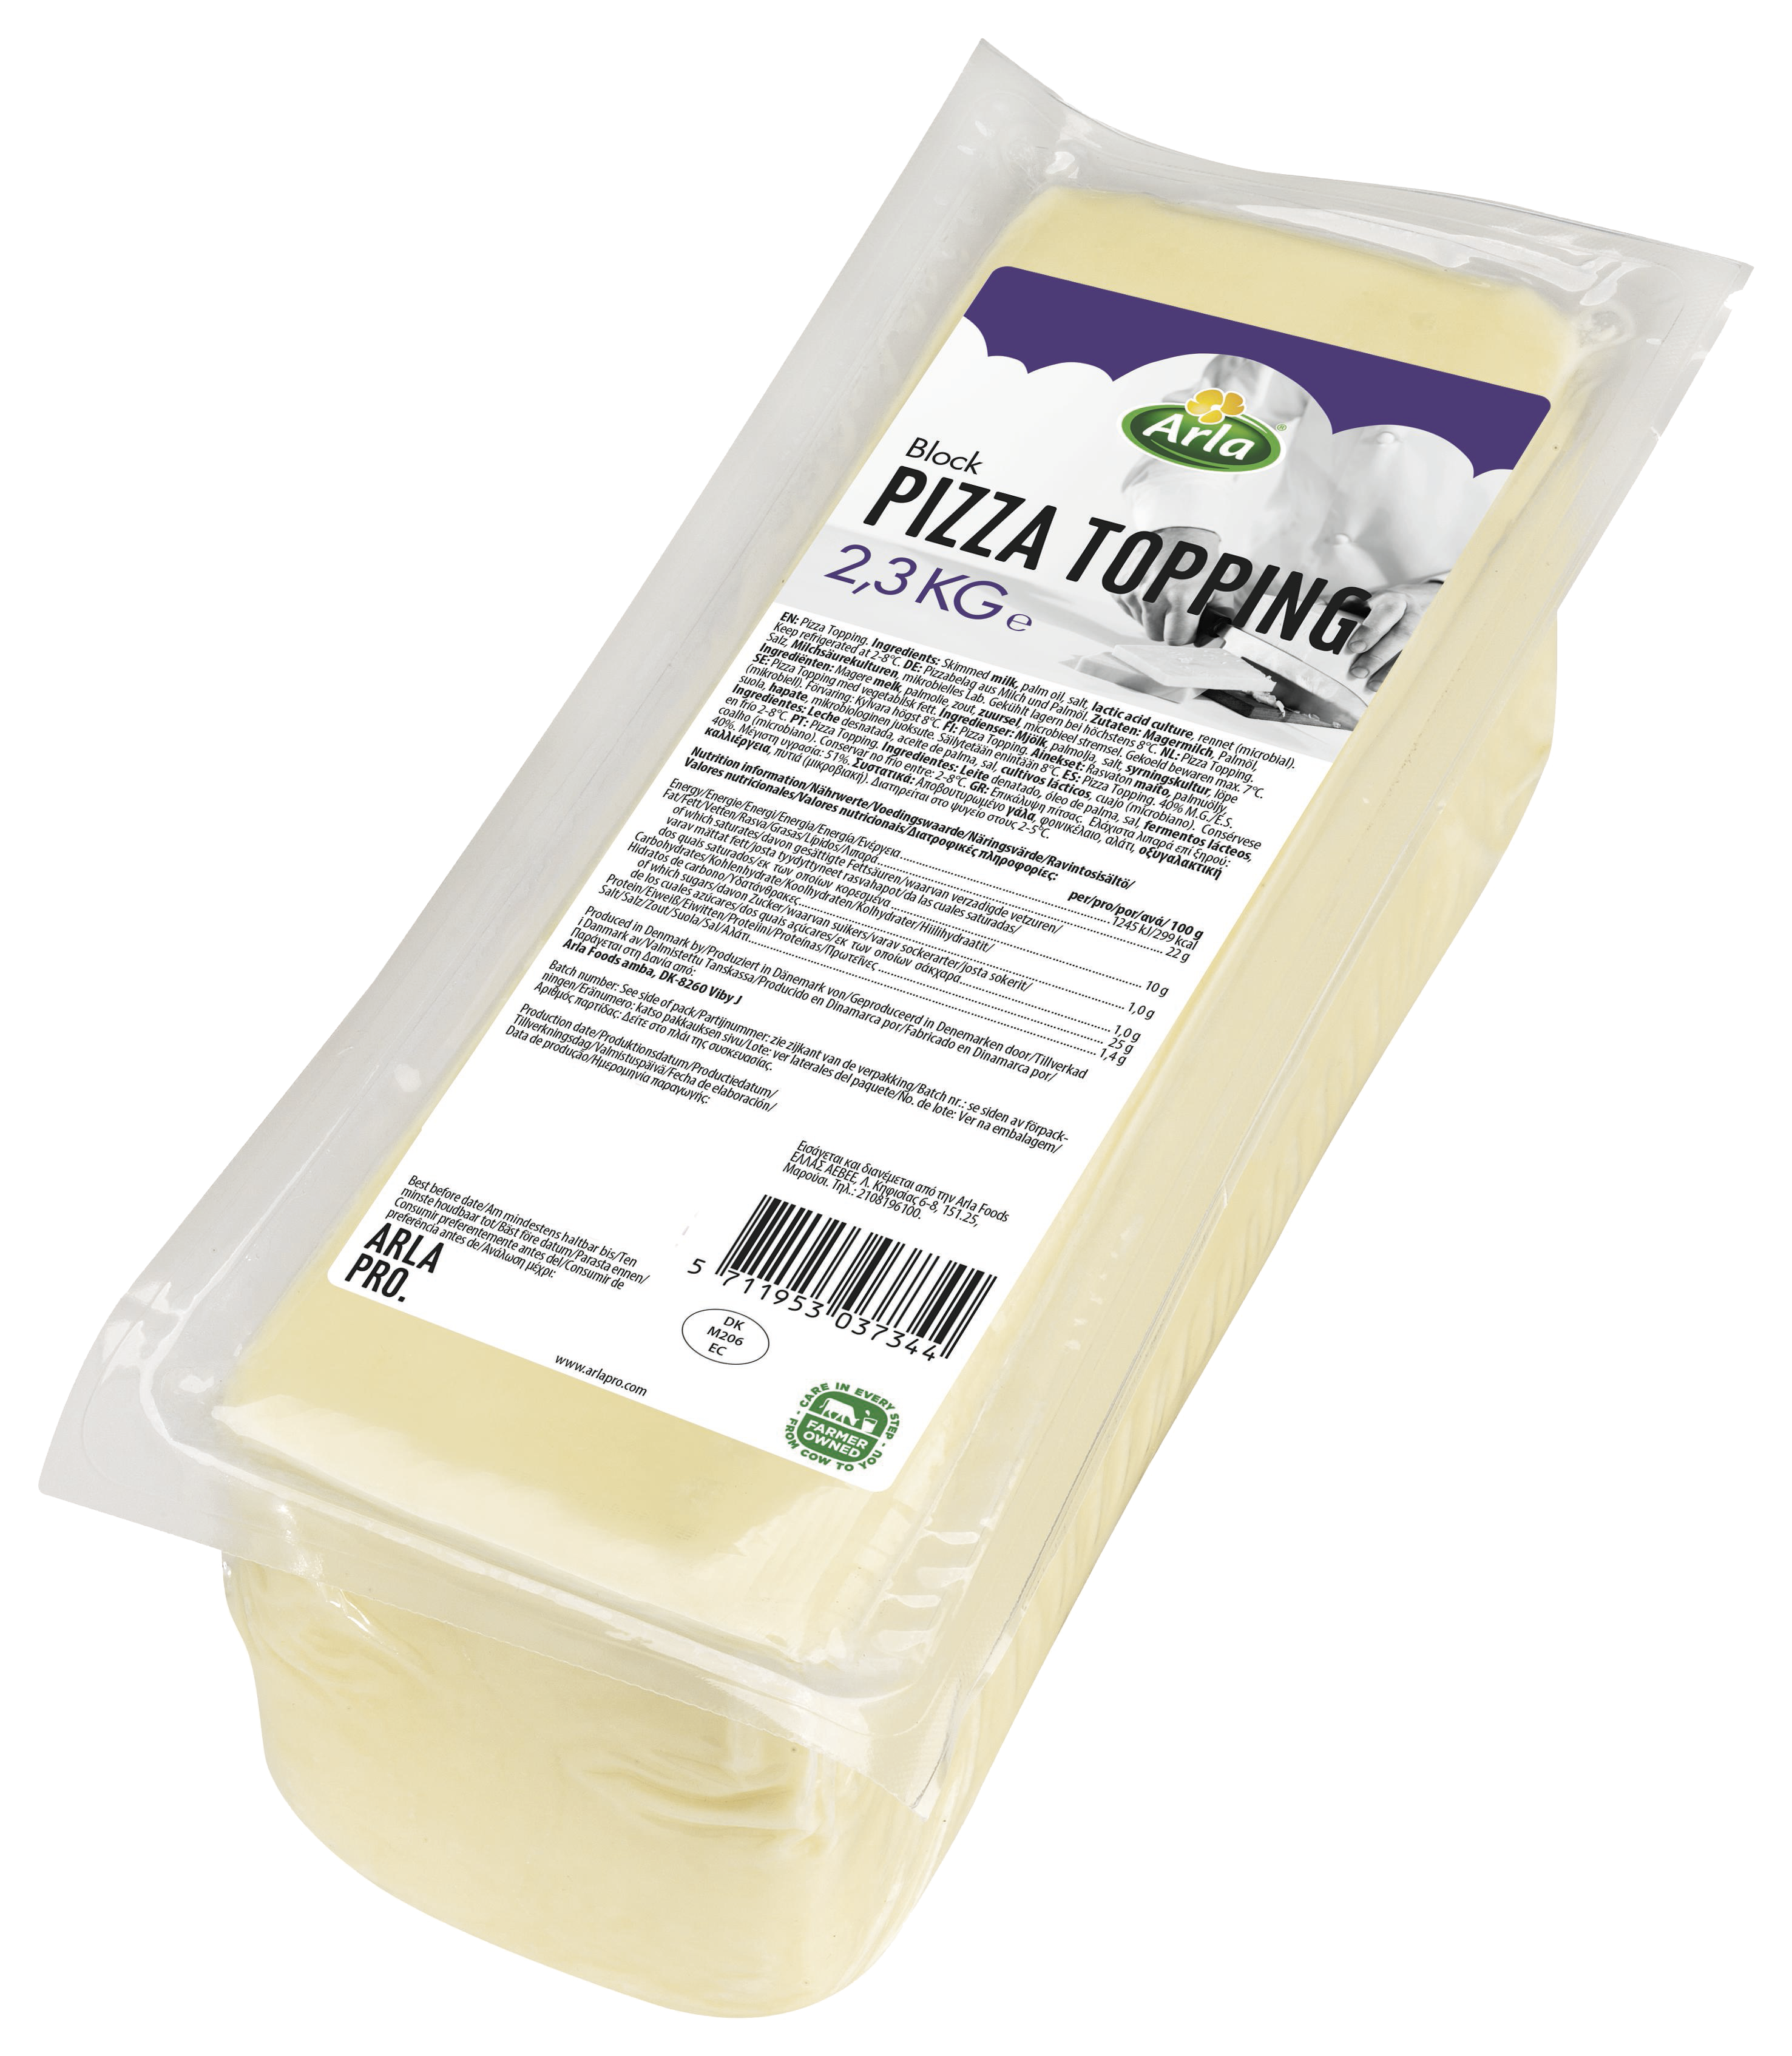 Arla Pro Pizzatopping Bloque 2.3kg